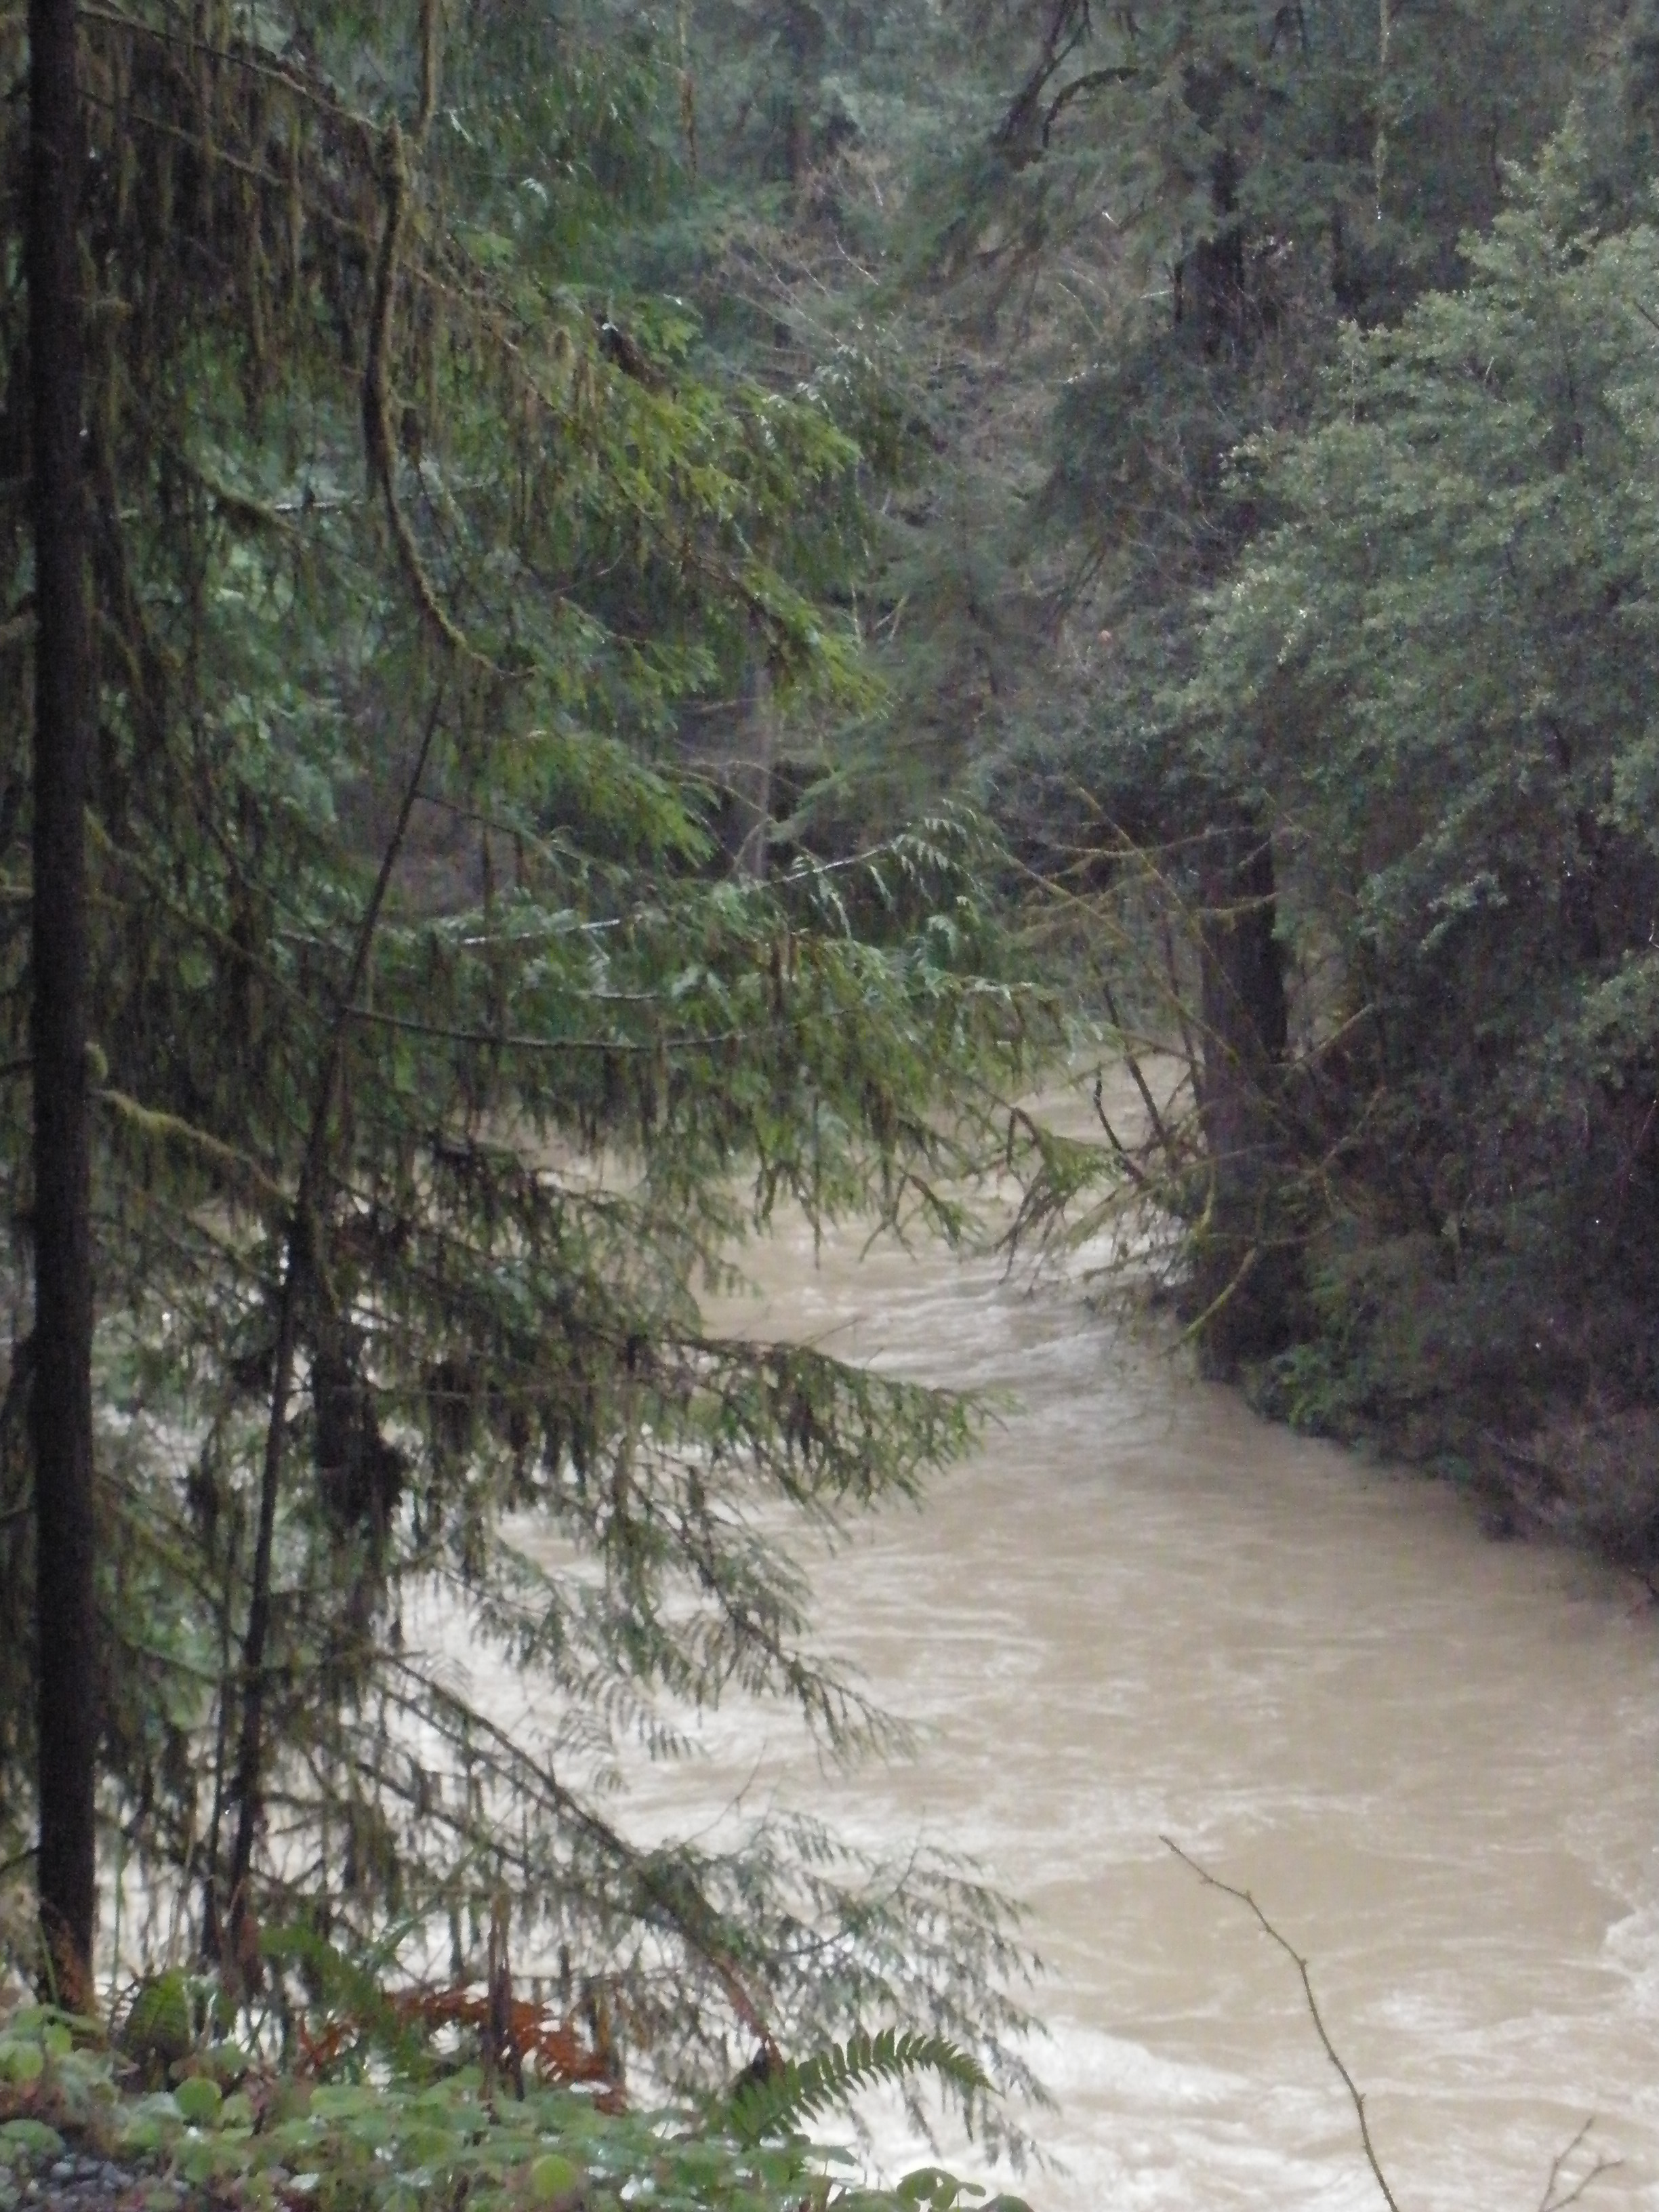 Personal photo: Frequent flooding that redwoods are able to overcome.